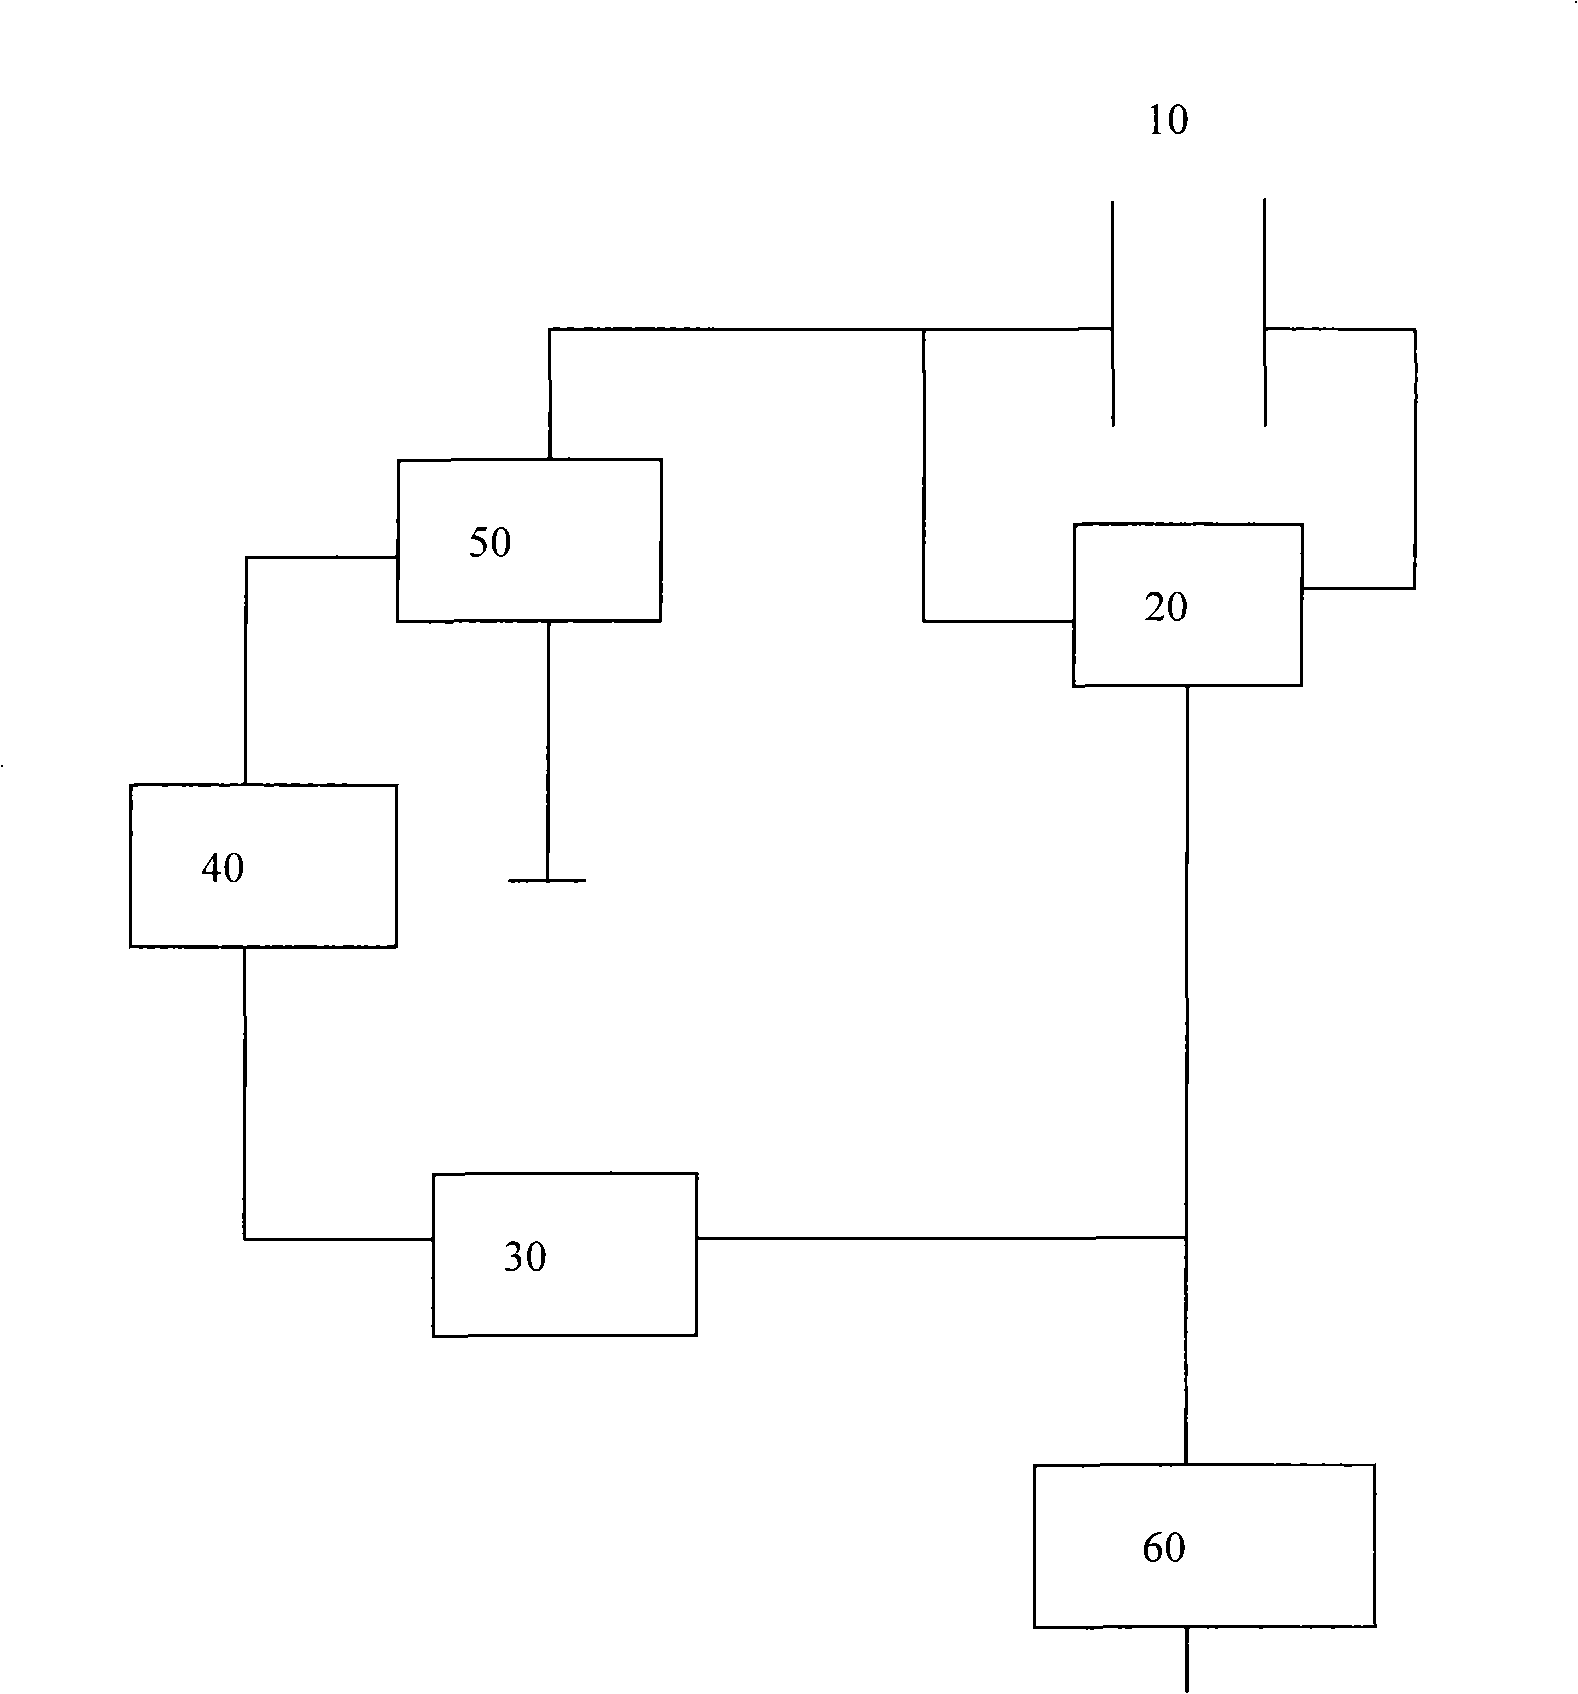 Constant-voltage electroanalysis water making apparatus and method